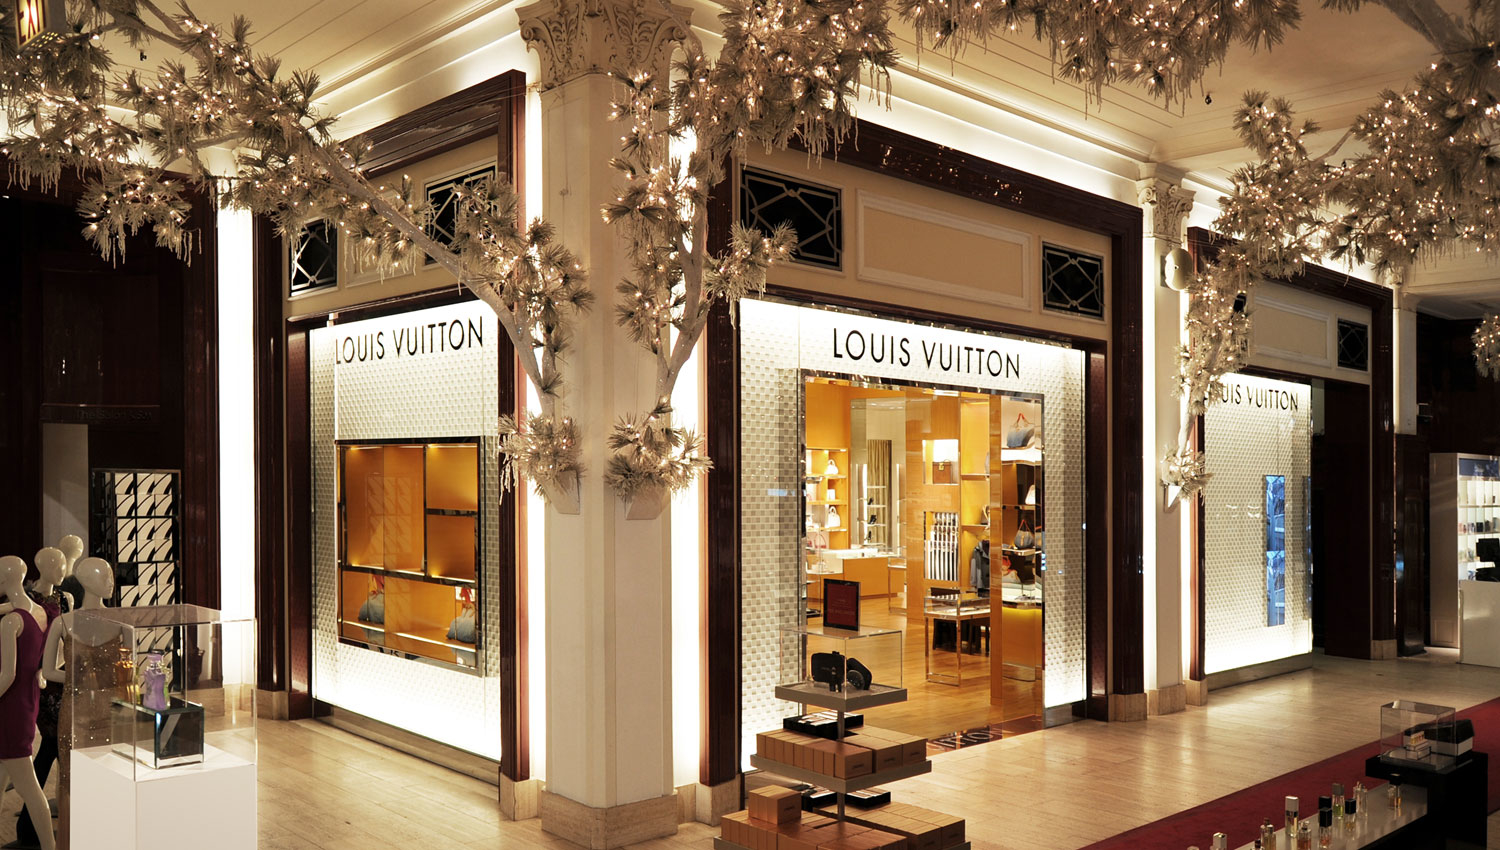 Louis Vuitton Flagship Store Nyc Contact | Confederated Tribes of the Umatilla Indian Reservation